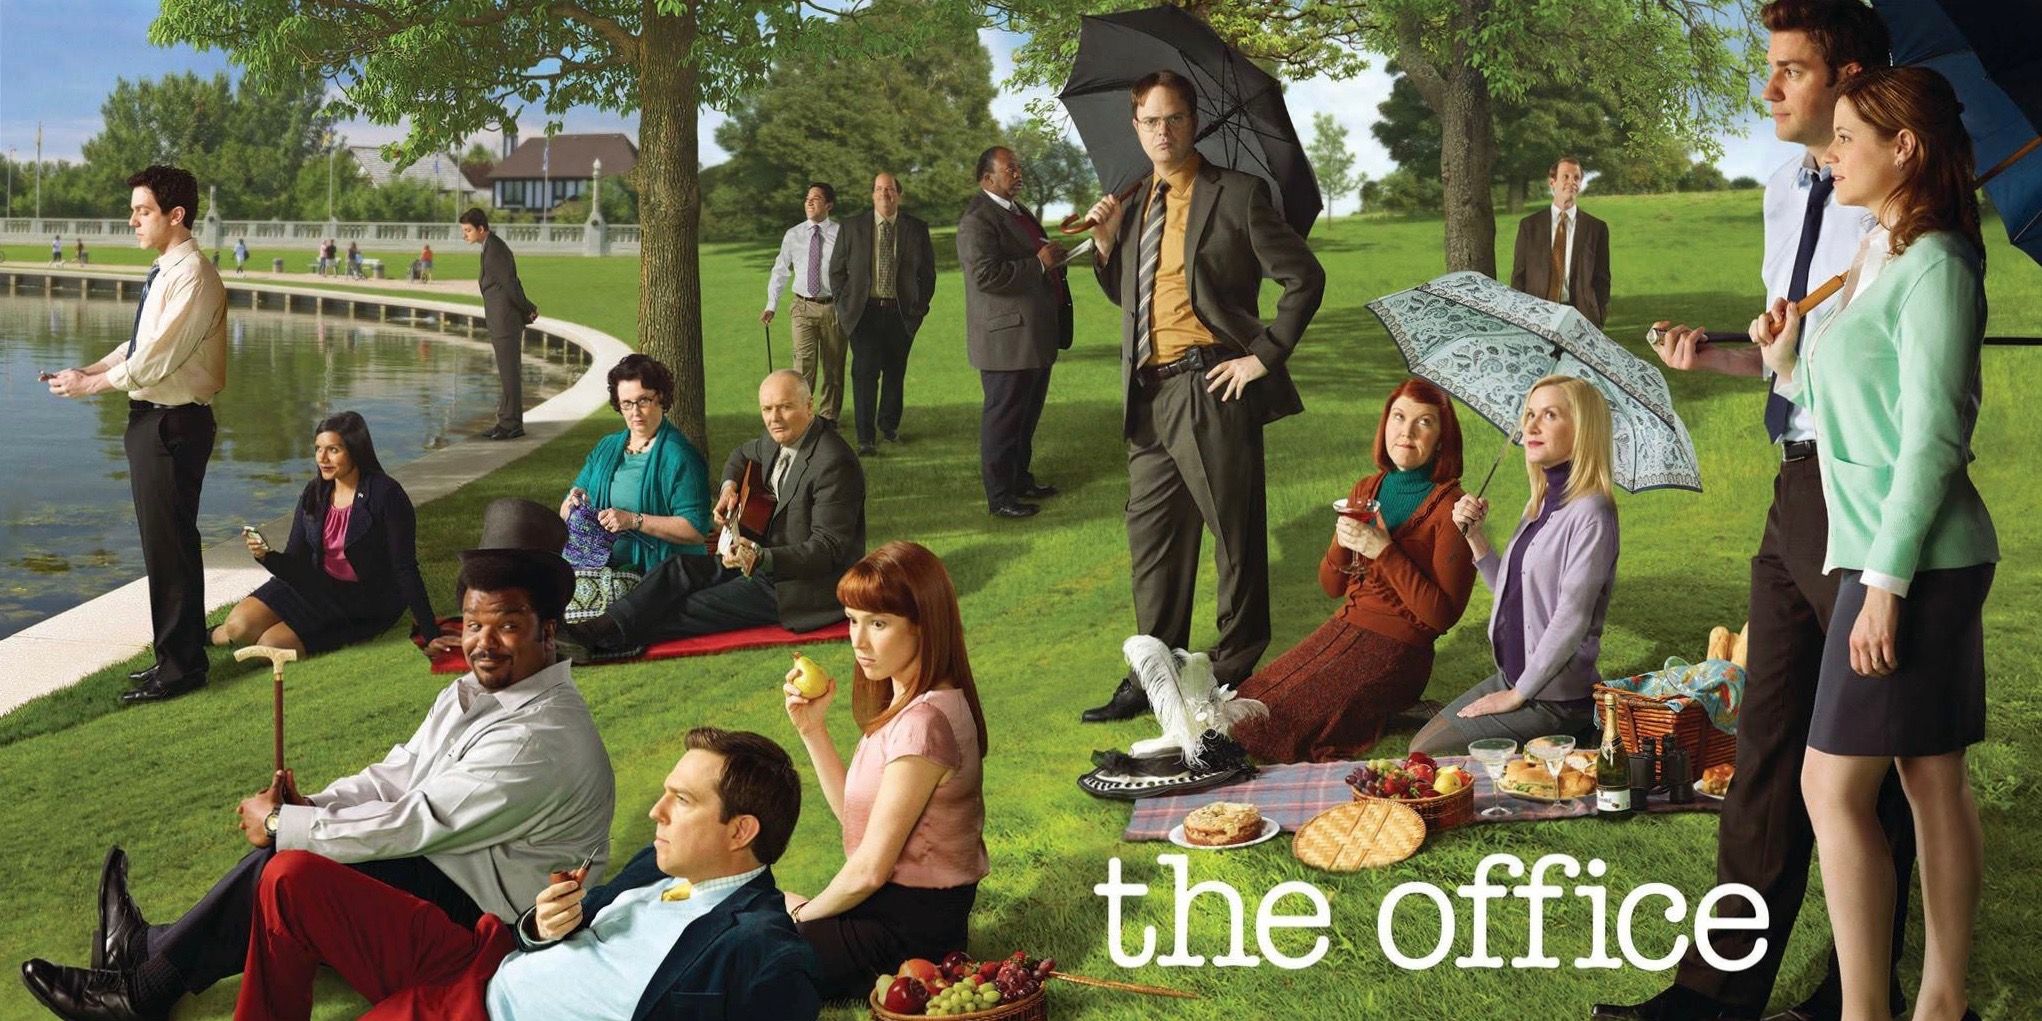 The Office Promotional Image